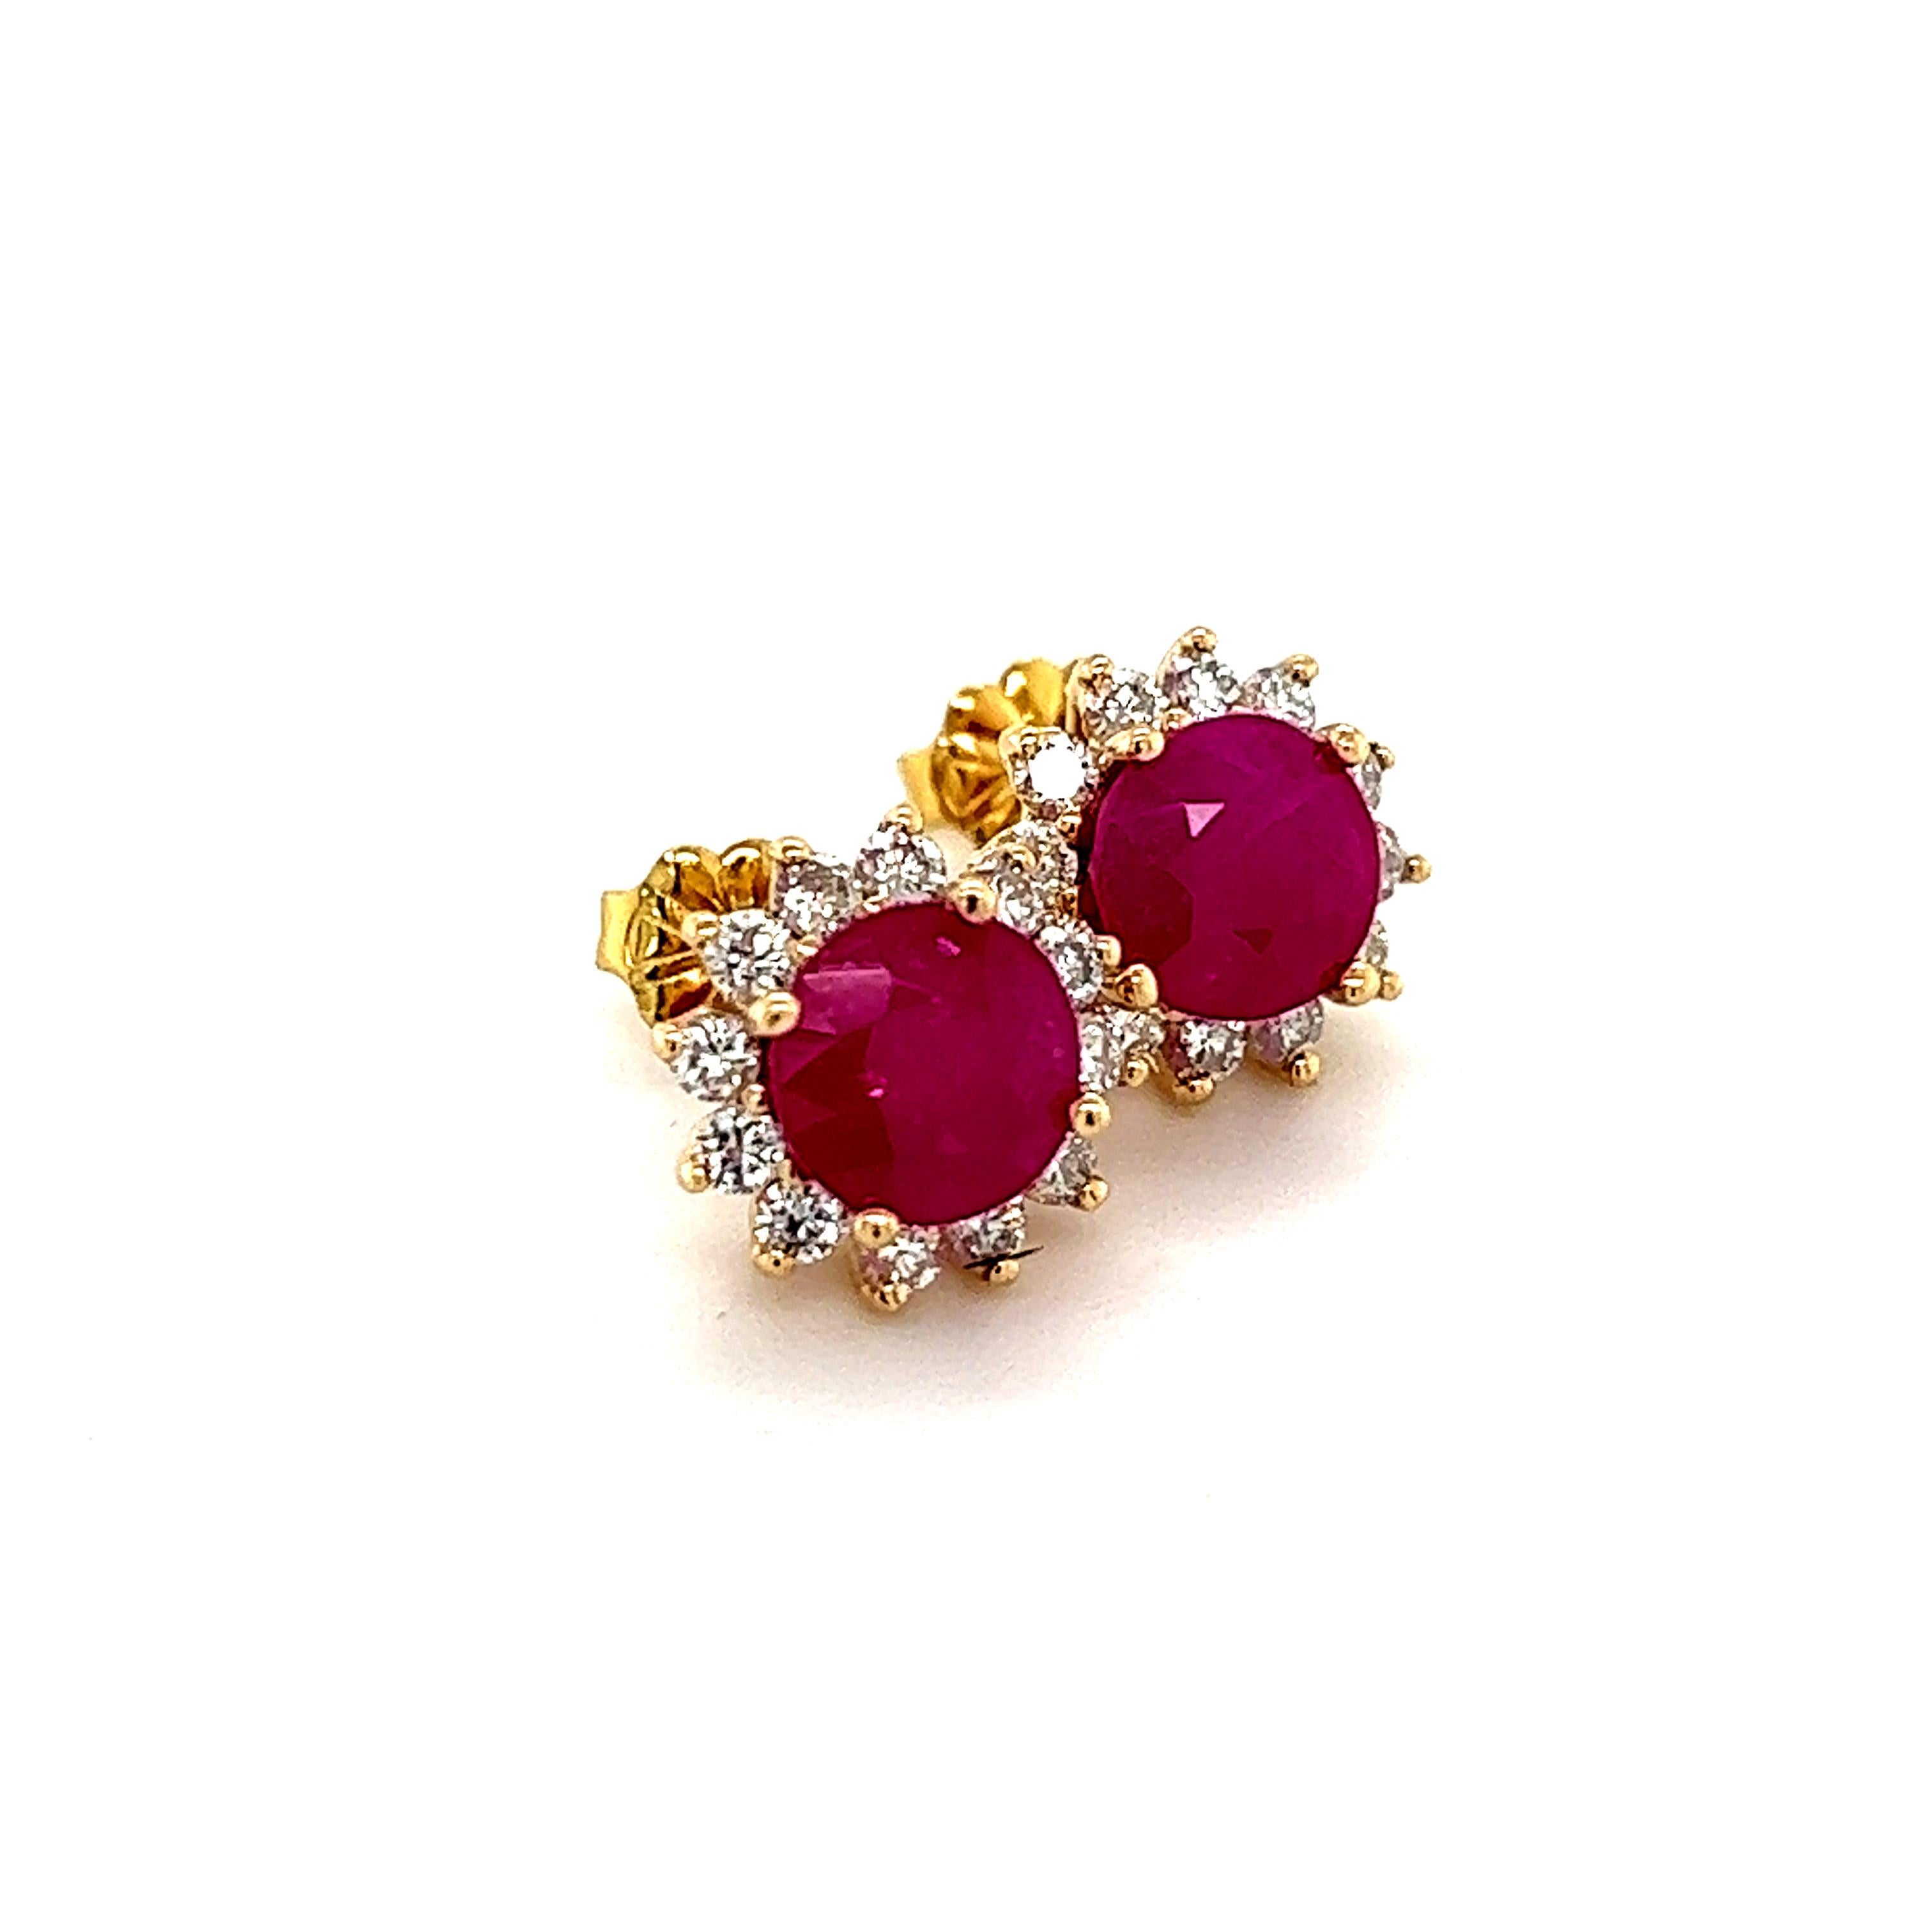 Round Cut Natural Ruby Diamond Earrings 14k Gold 3.72 TCW Certified For Sale